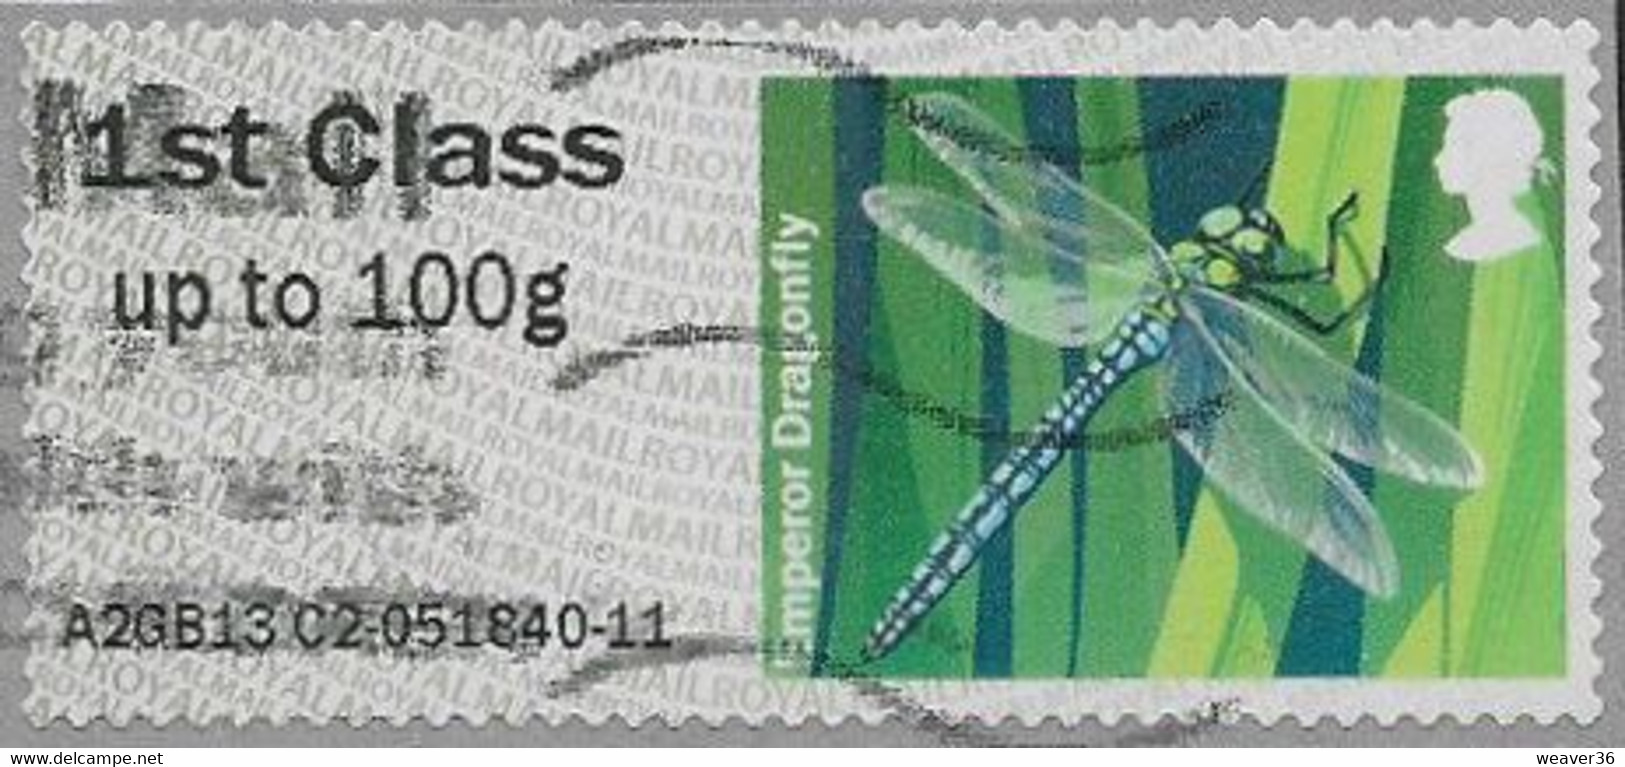 GB 2013 Freshwater Life (1st Series) 1st Type 5 Issuing Office A2GB13 Used [21/25714/ND] - Post & Go Stamps